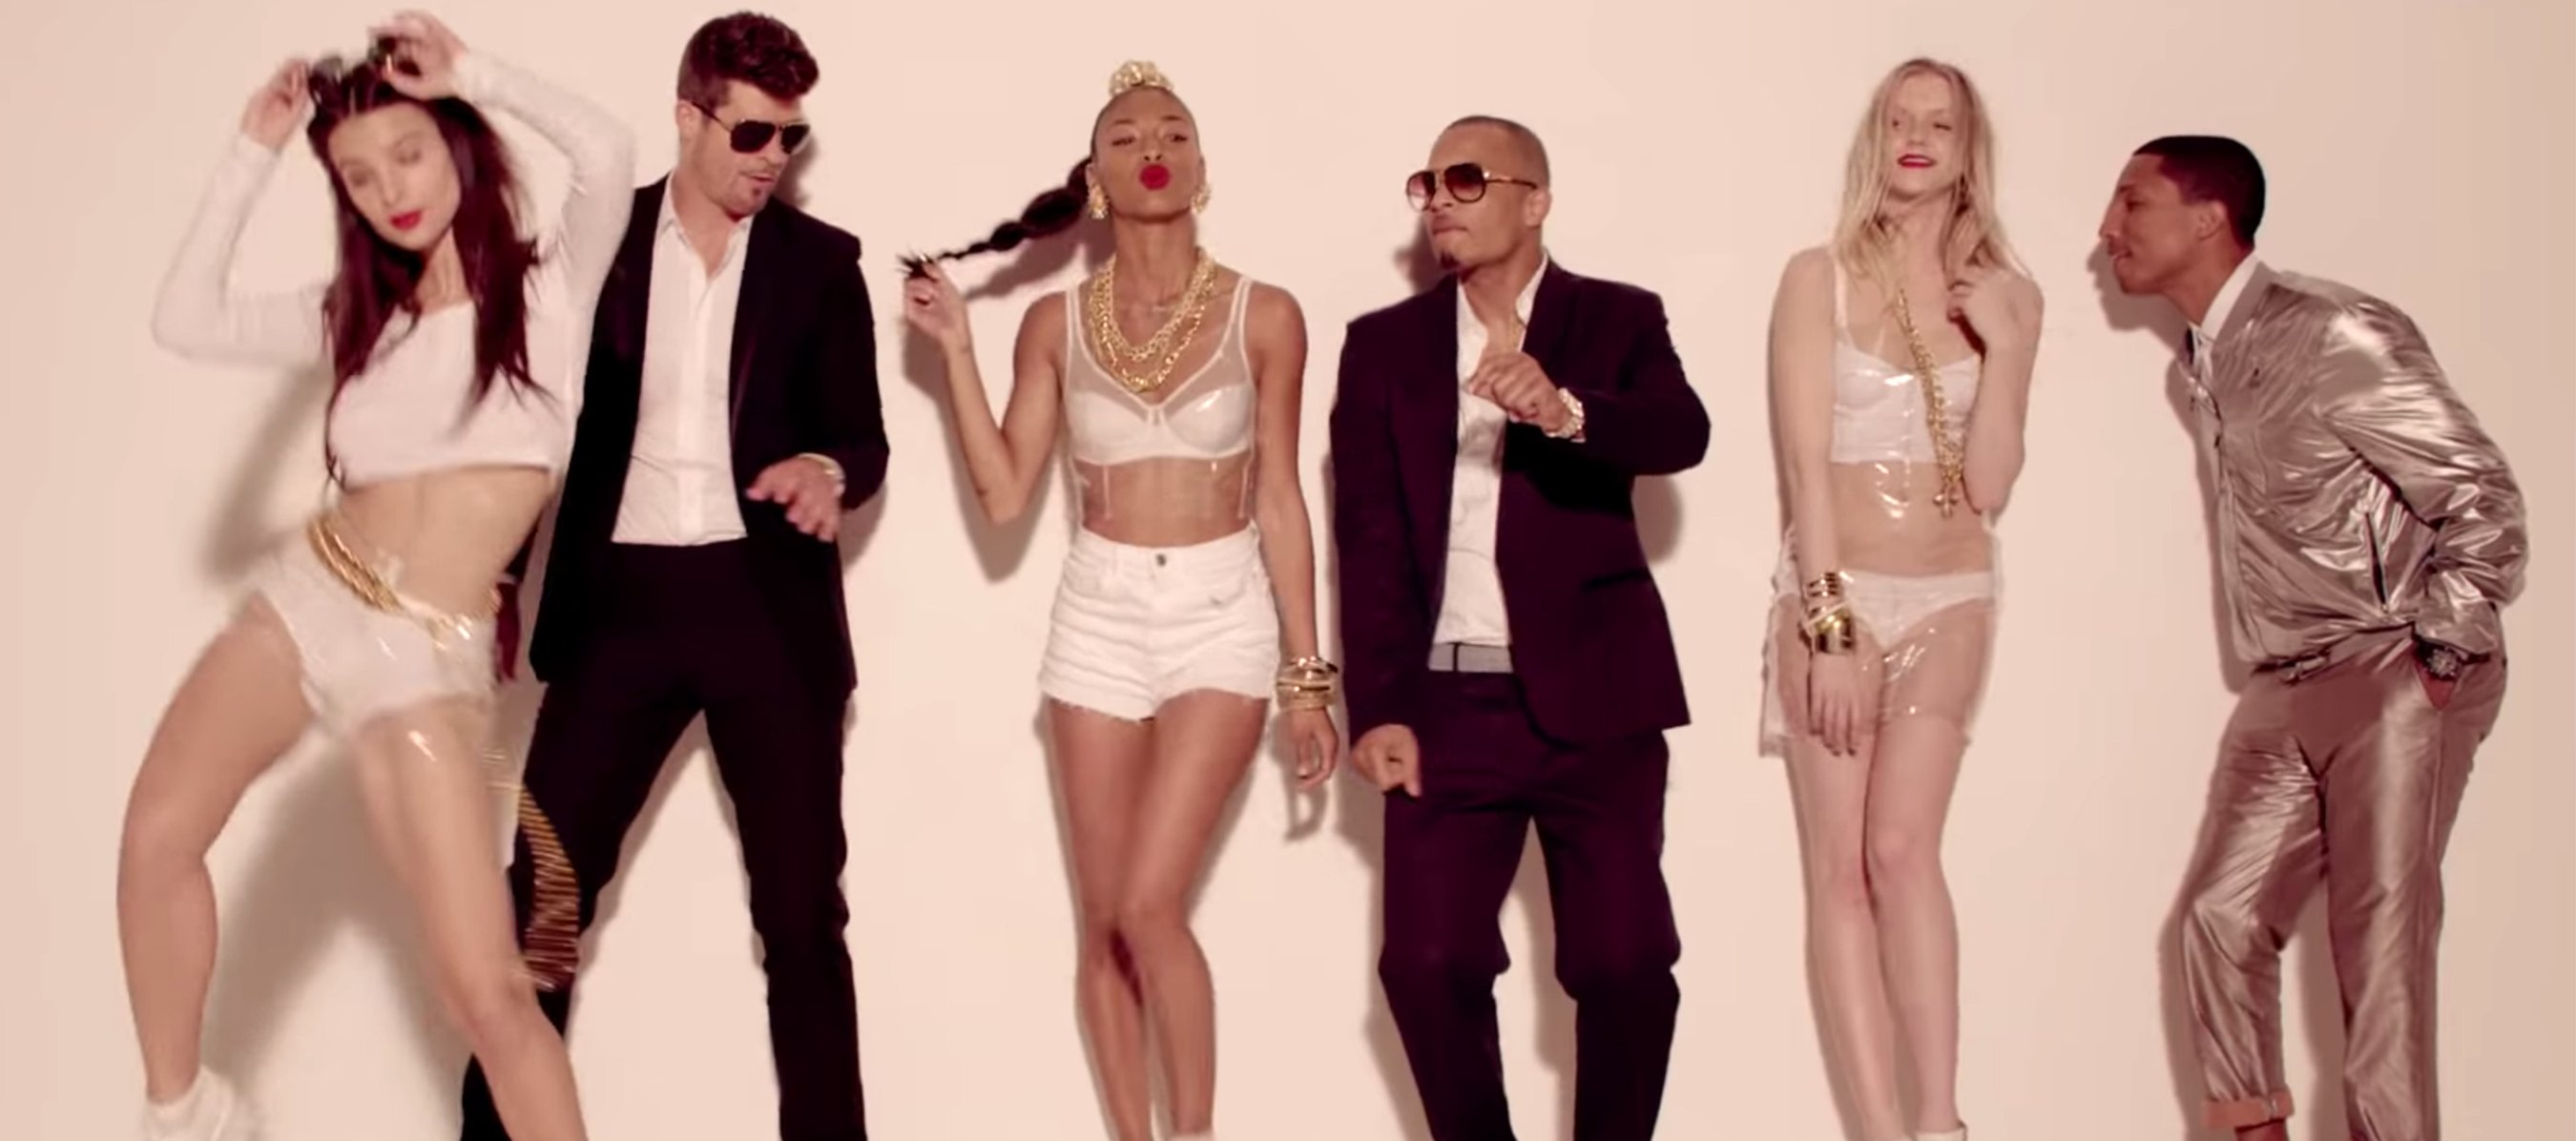 best of Thicke unrated robin blurred lines